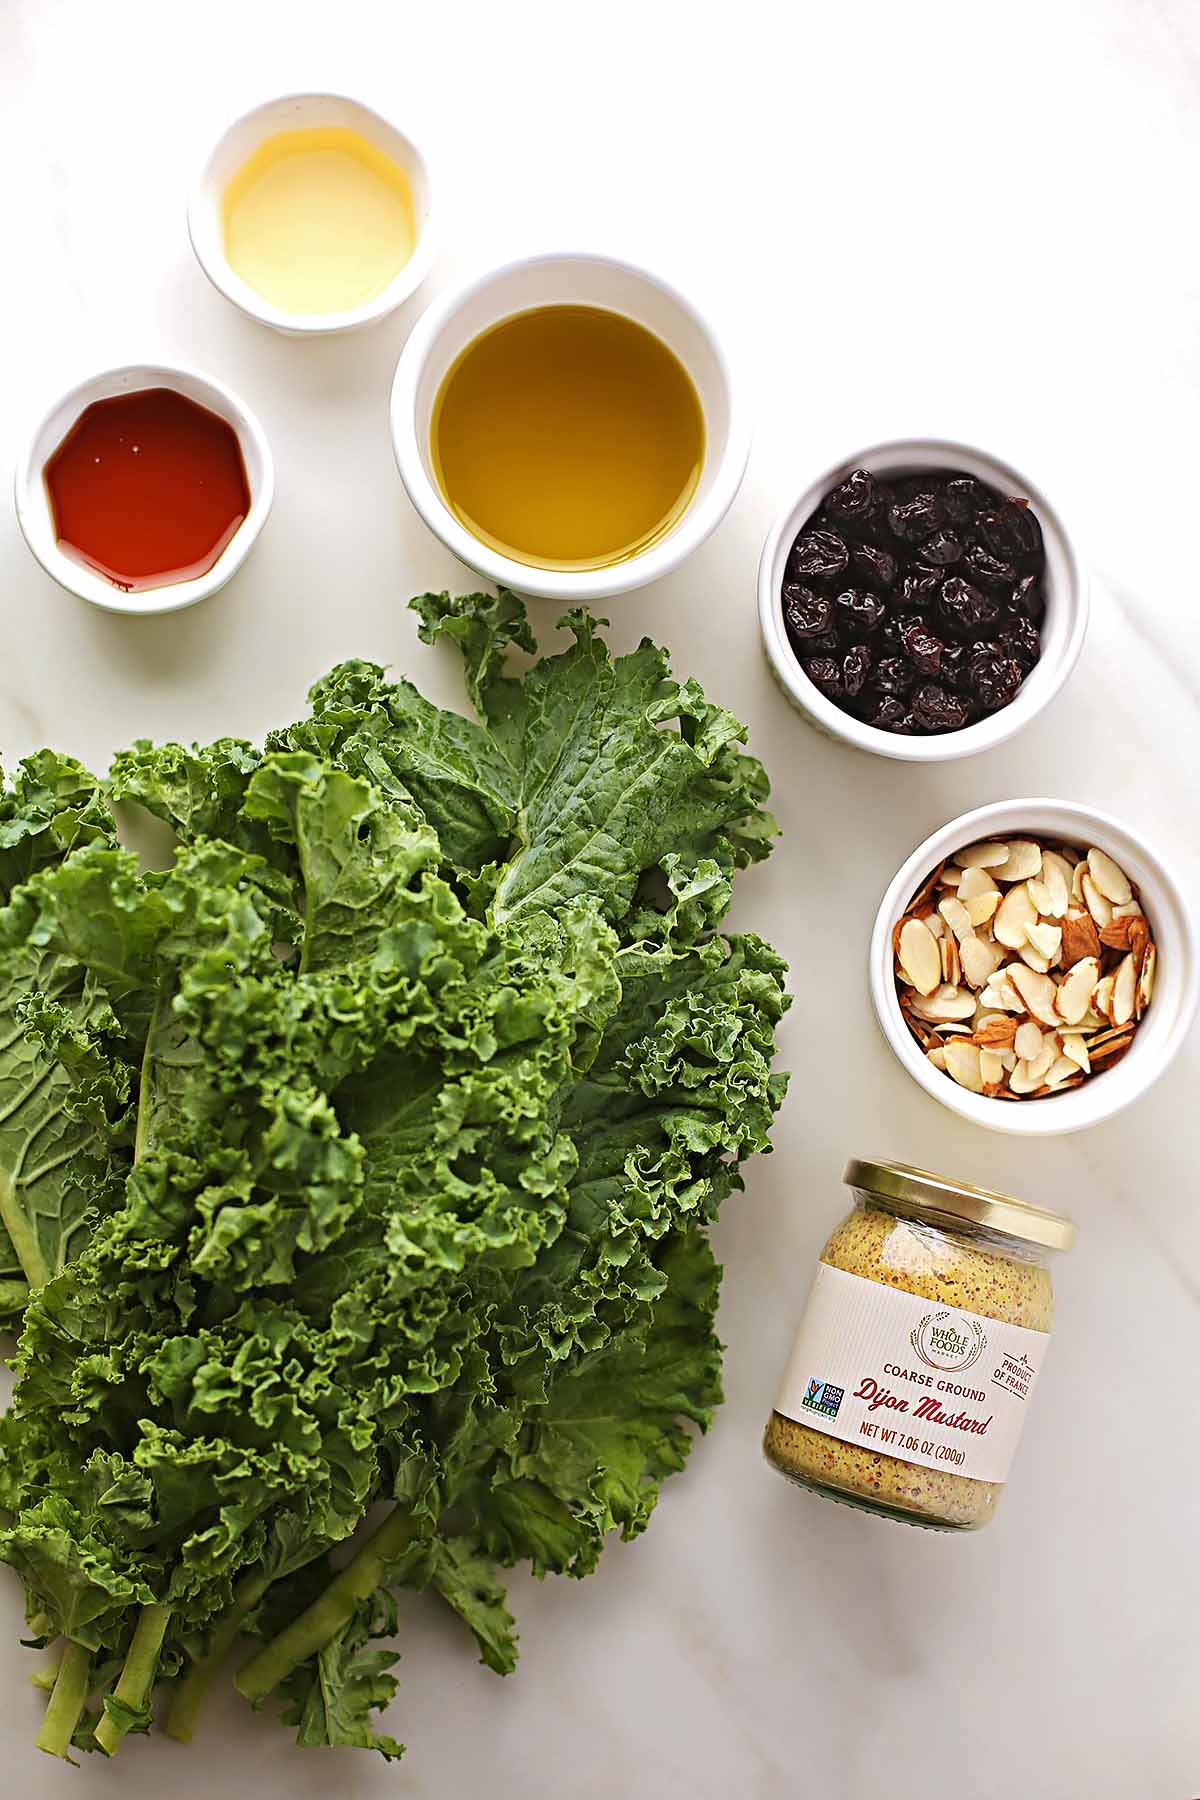 tabletop with prepared ingredients to make salad with kale: kale, white bowls with dried berries, almonds, dressing